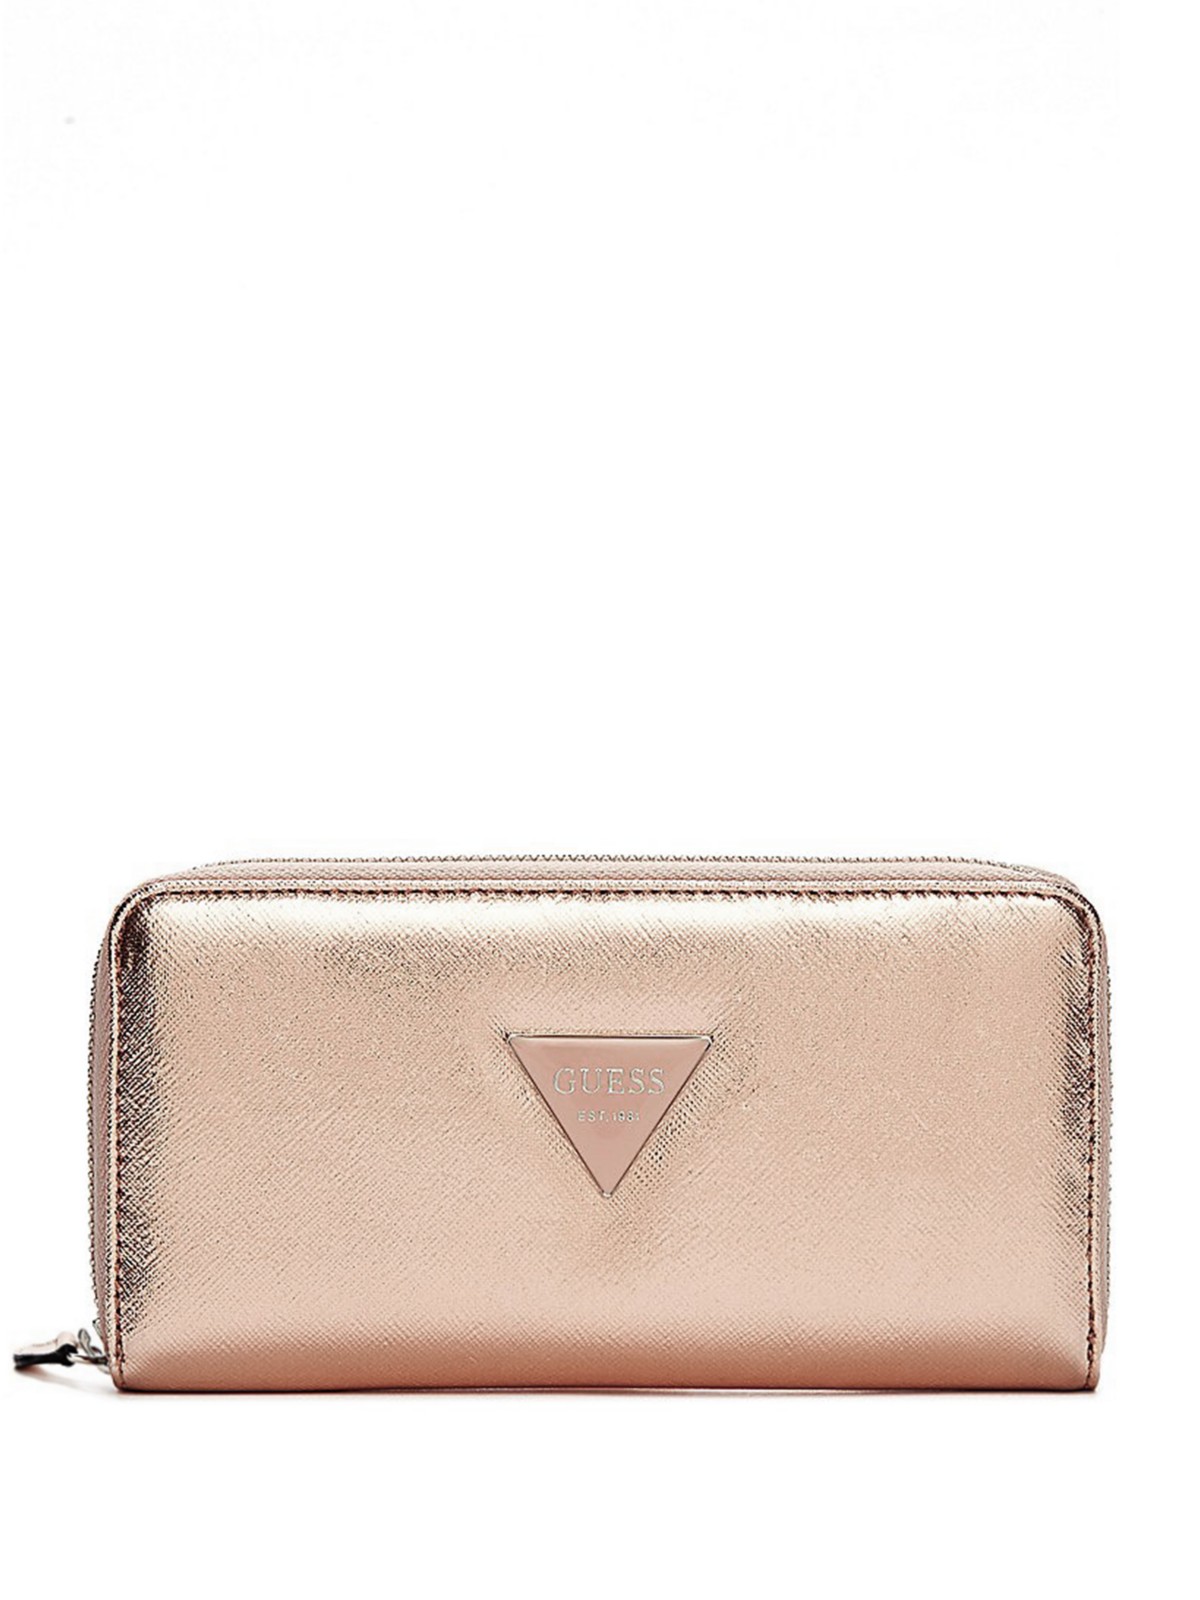 Guess Wallets For Womens | SEMA Data Co-op